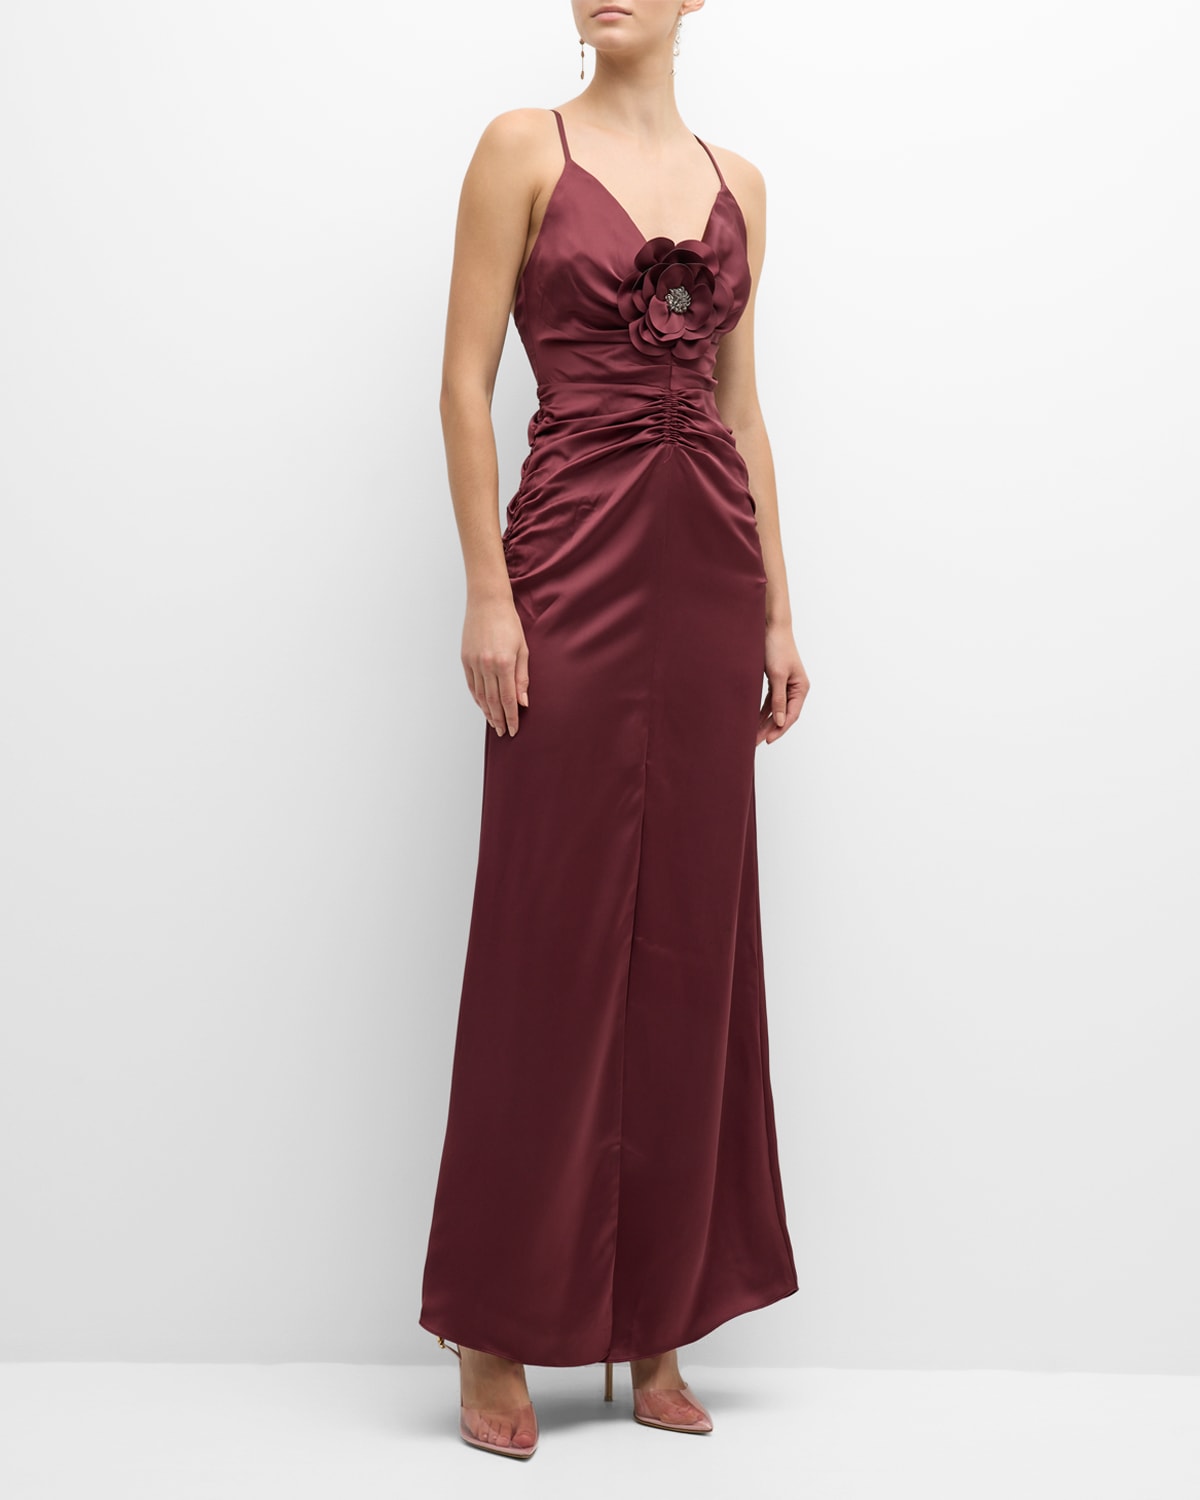 RAMY BROOK LENA RUCHED SLEEVELESS FLOWER GOWN